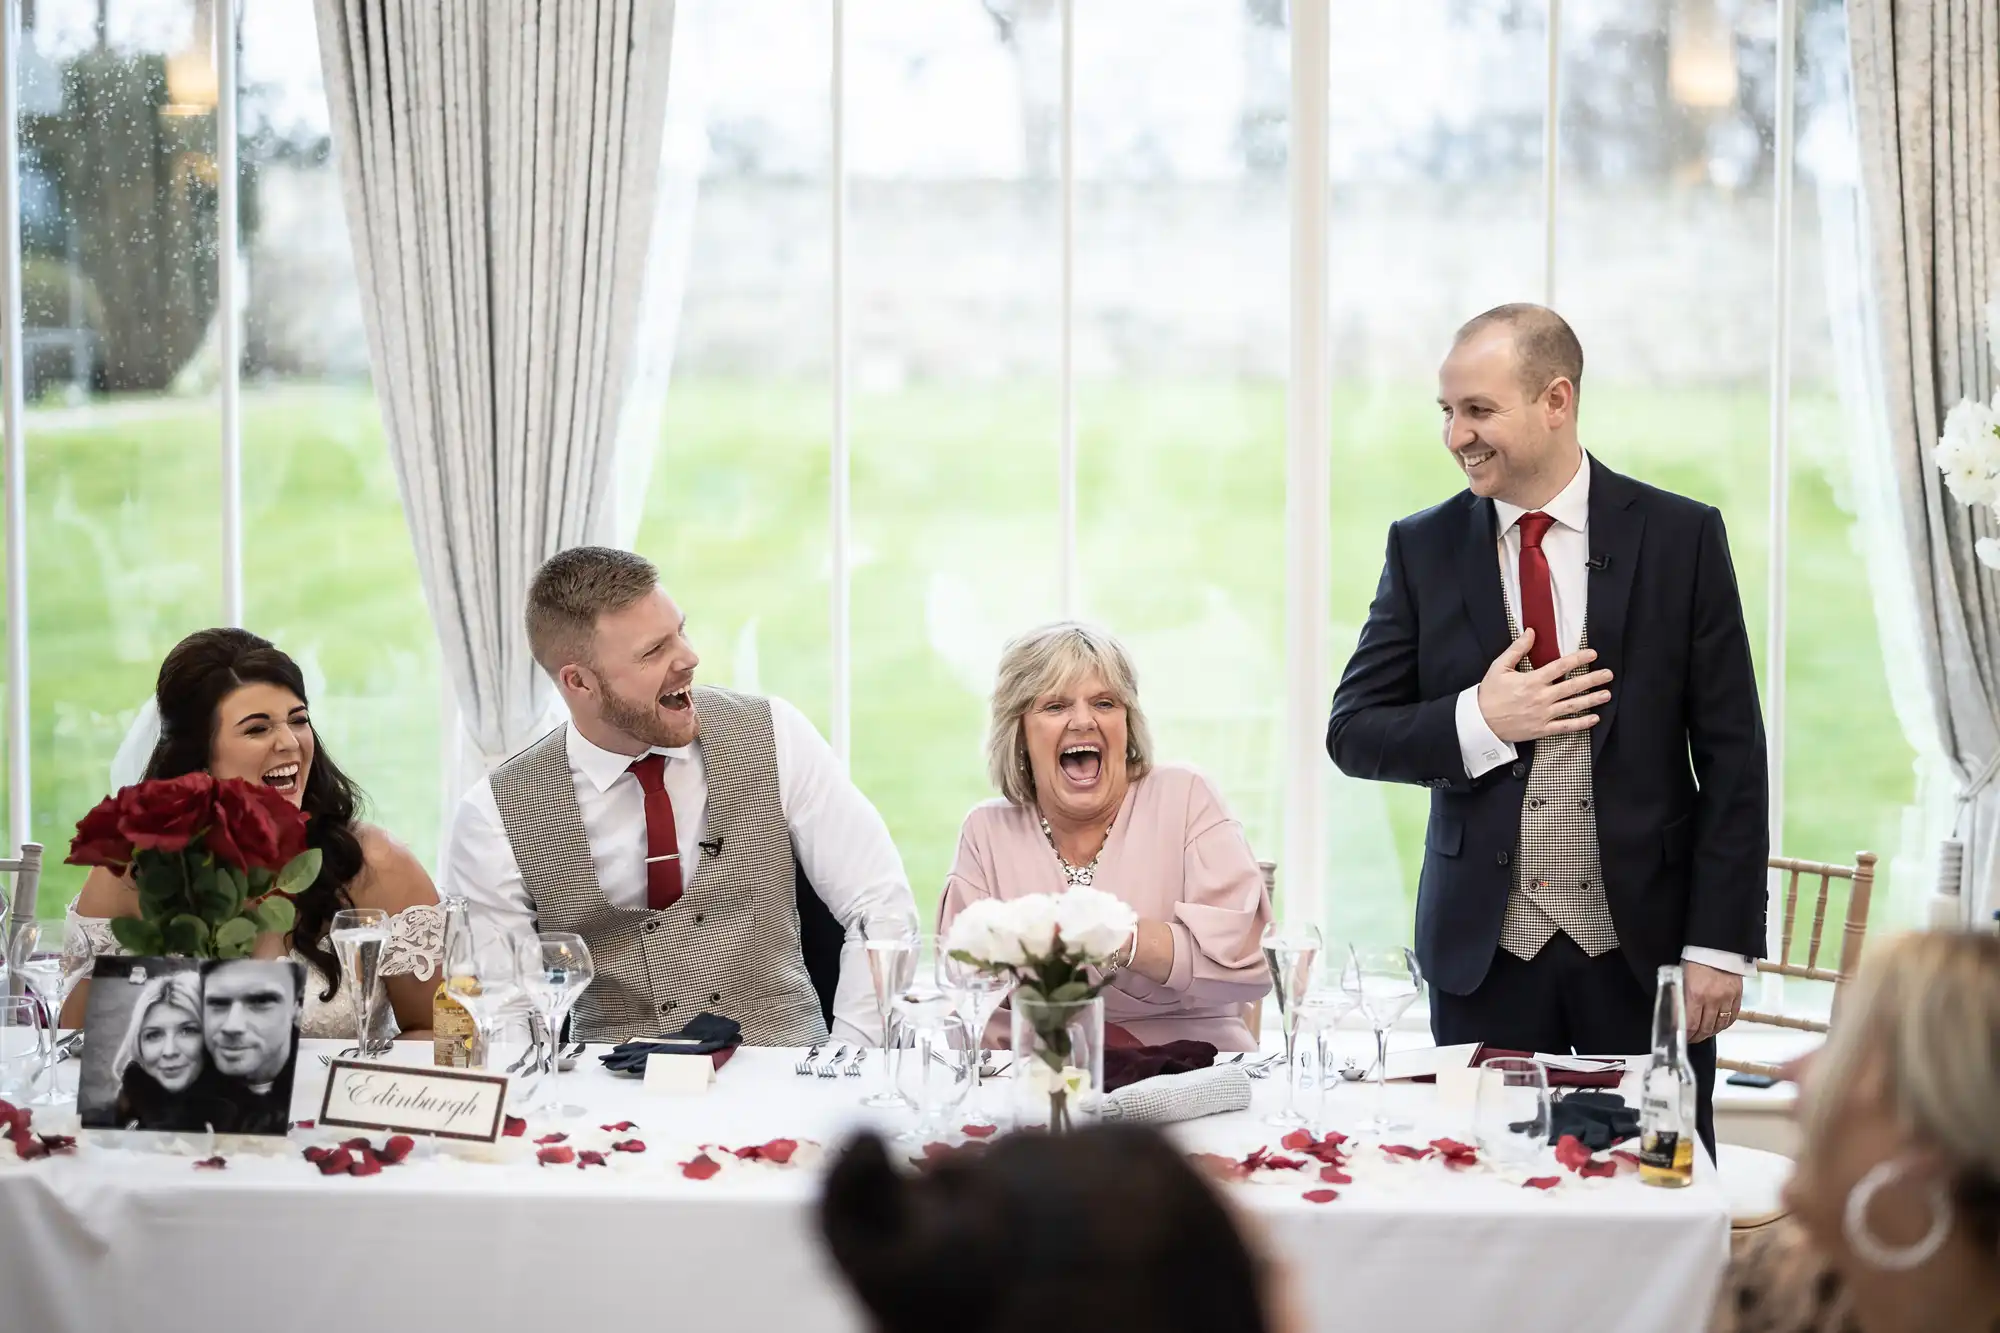 Four people at a wedding reception table, with two men in suits and ties, a woman in a pink blouse, and another woman in a dress, all laughing and smiling.